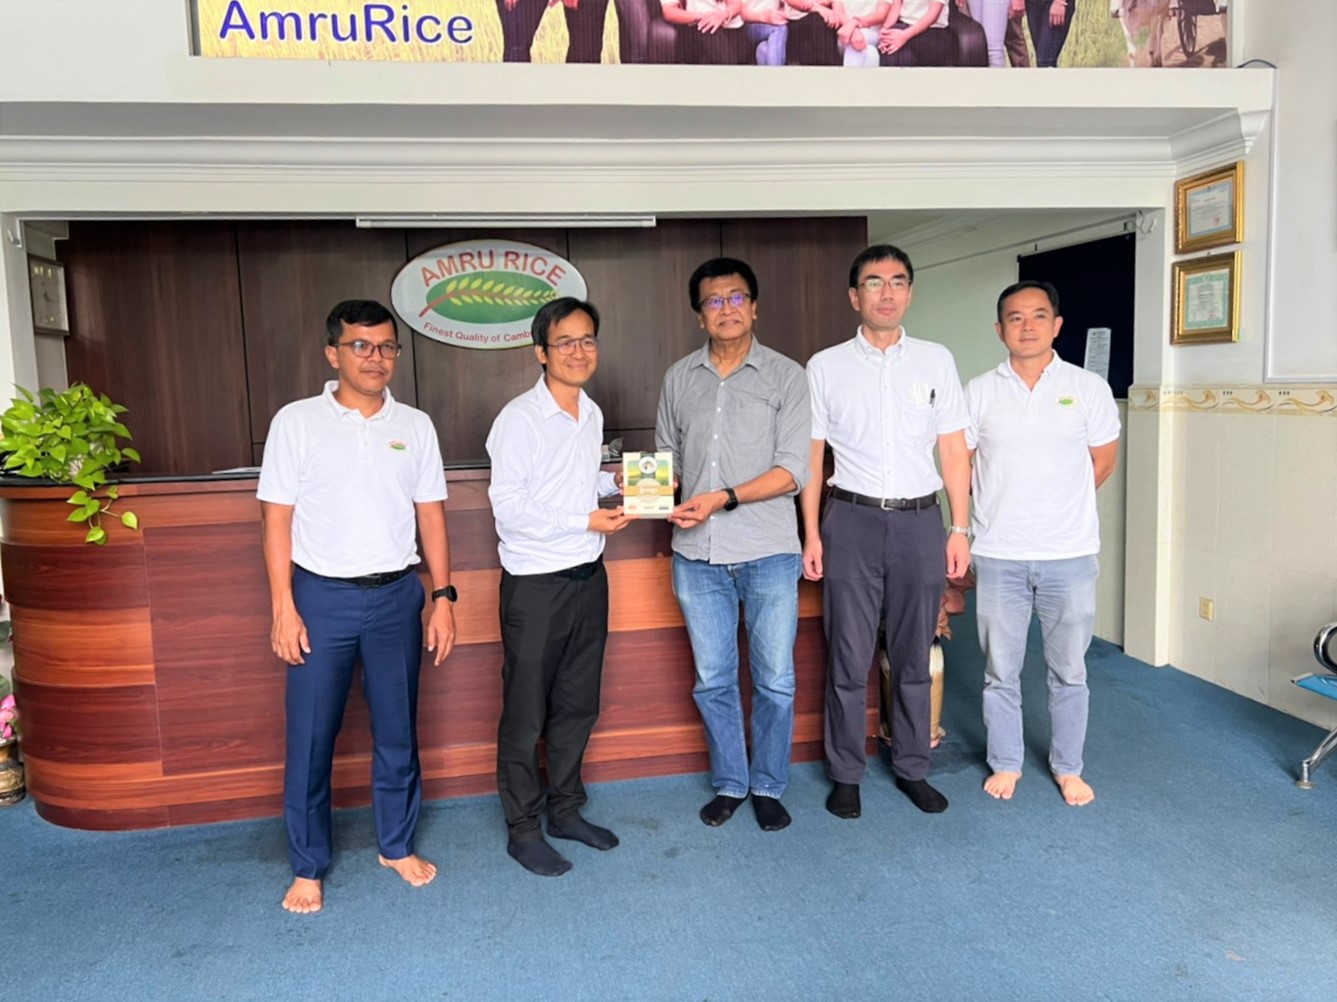 EXCHANGE INFORMATION ON CAMBODIA’S FOOD SECURITY WITH ‘AMRU RICE’ AND THE ‘MEKONG RIVER COMMISSION’